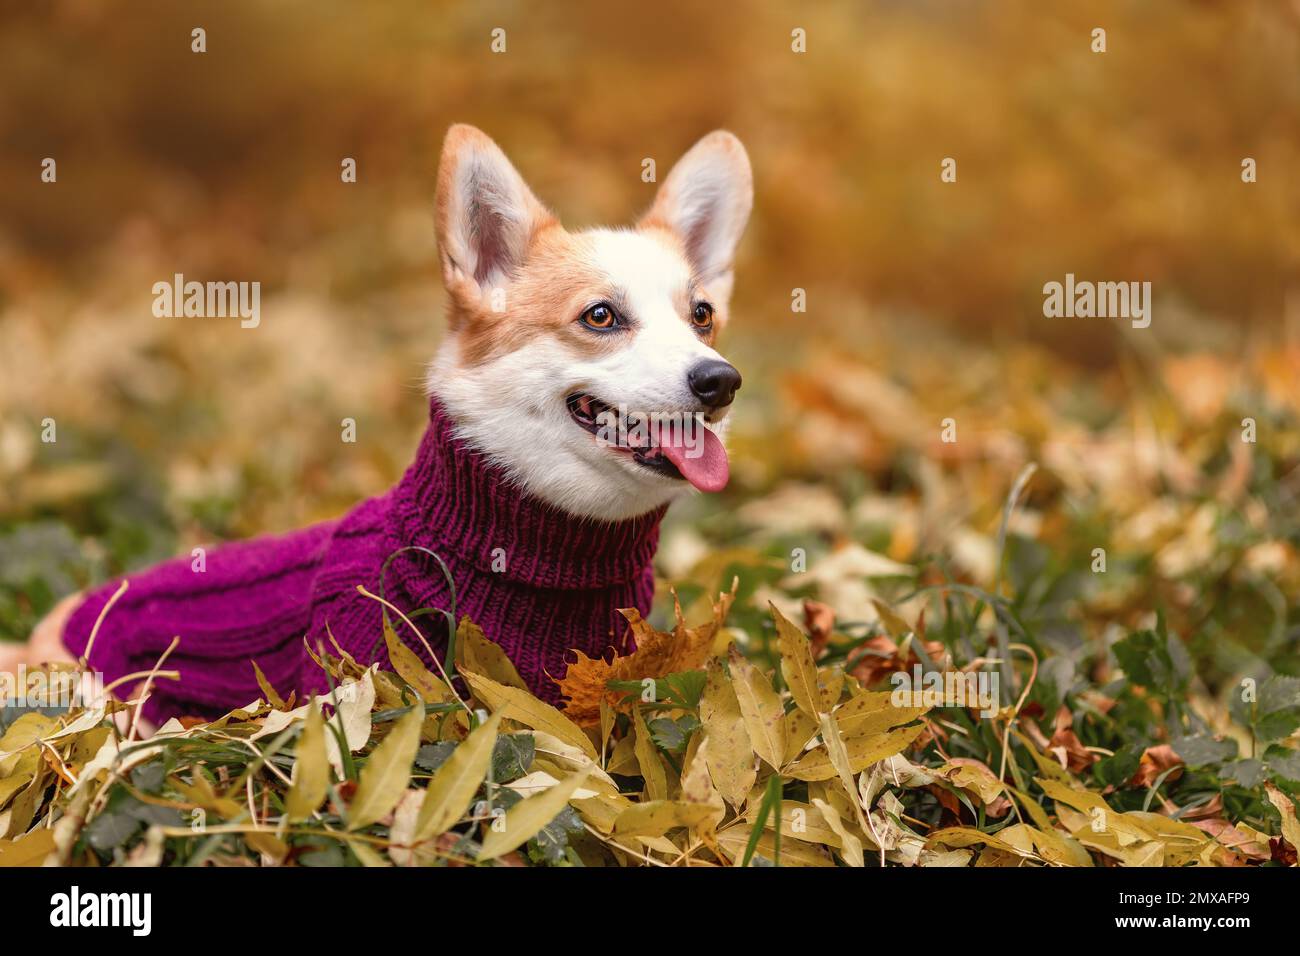 Cute little female dog of welsh corgi pembroke breed wearing knitted sweater at autumn nature among yellow fallen leaves. Pet portrait outdoors. Dog l Stock Photo